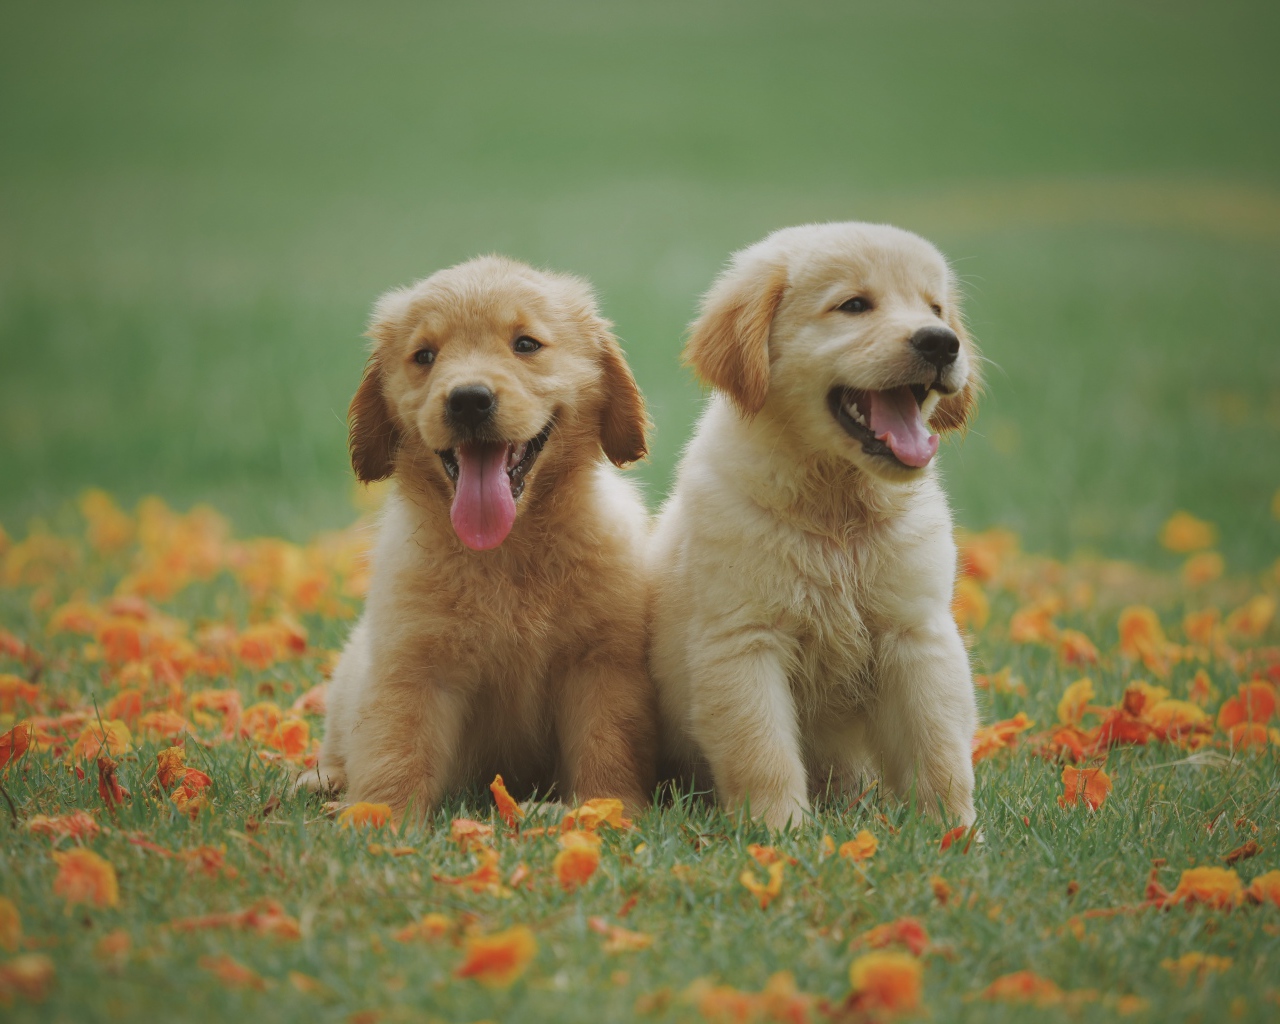 Two yellow puppies of a golden retriever sitting on the grass